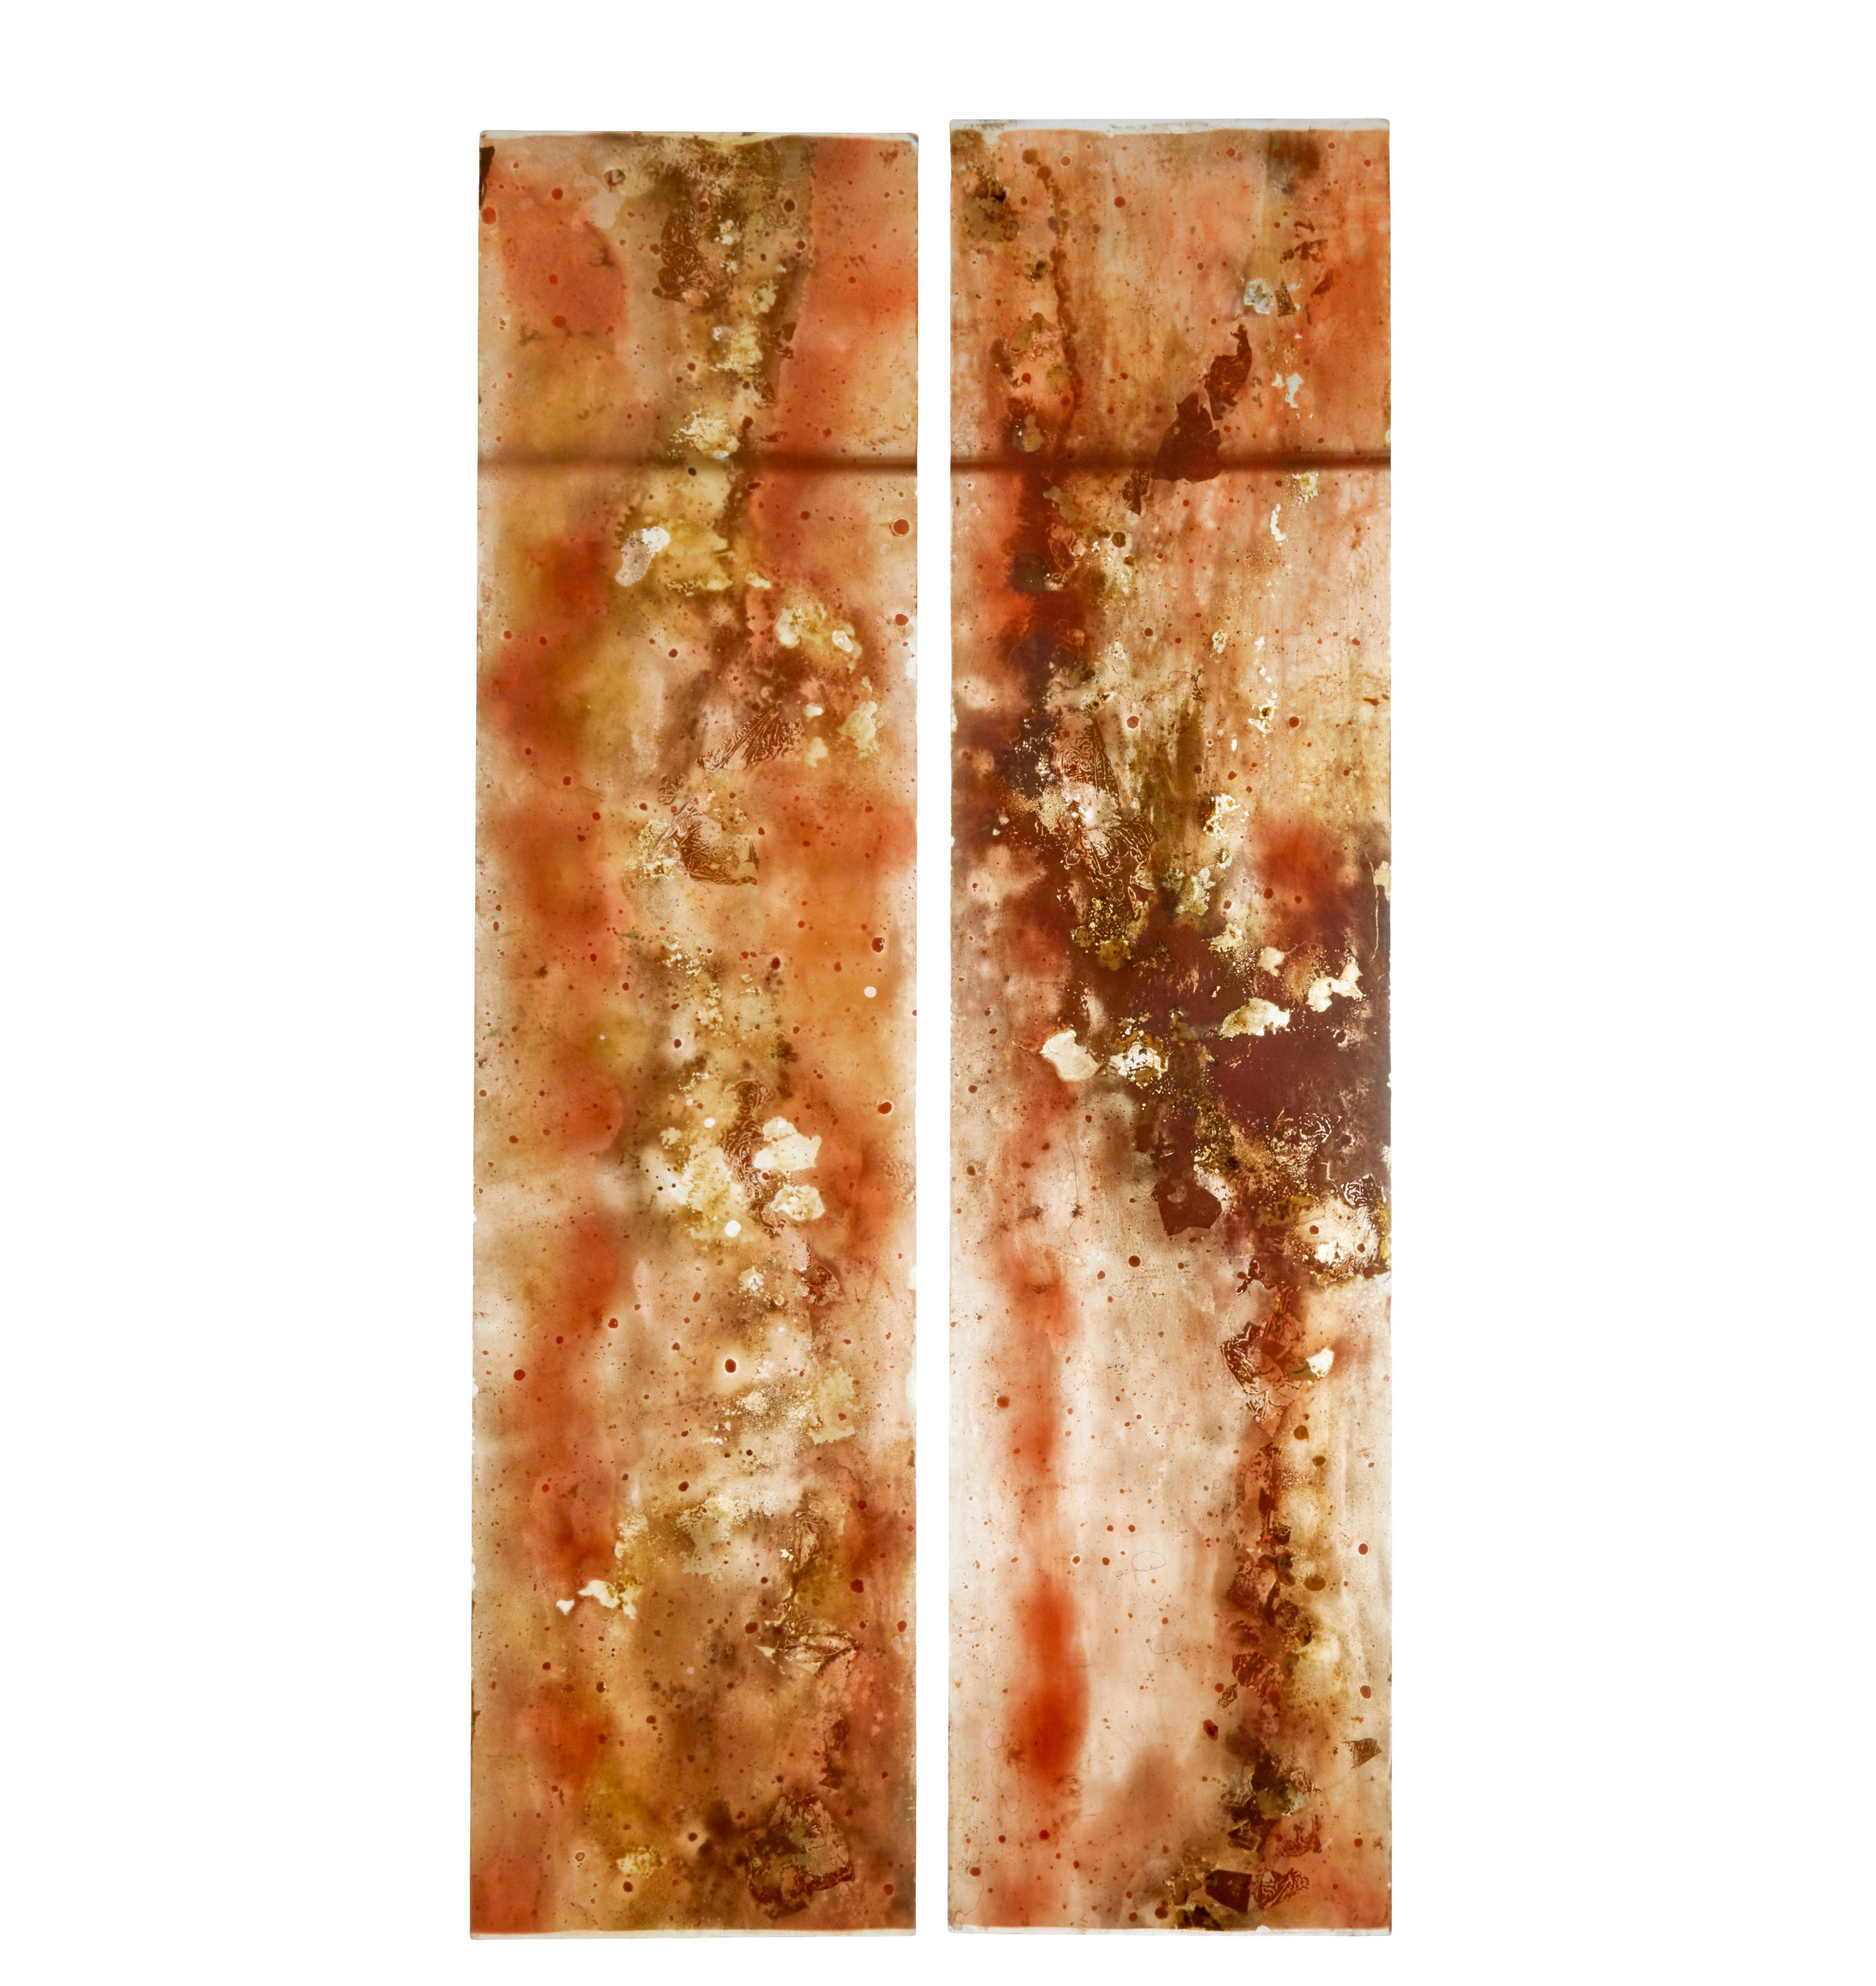 Pair of large french 1950’s acrylic and resin abstract panels gold leaf circa 1950.

Screens are made from browns, oranges, yellows and greens with gold leaf in places.

They have been photographed with front light, front light with a black back